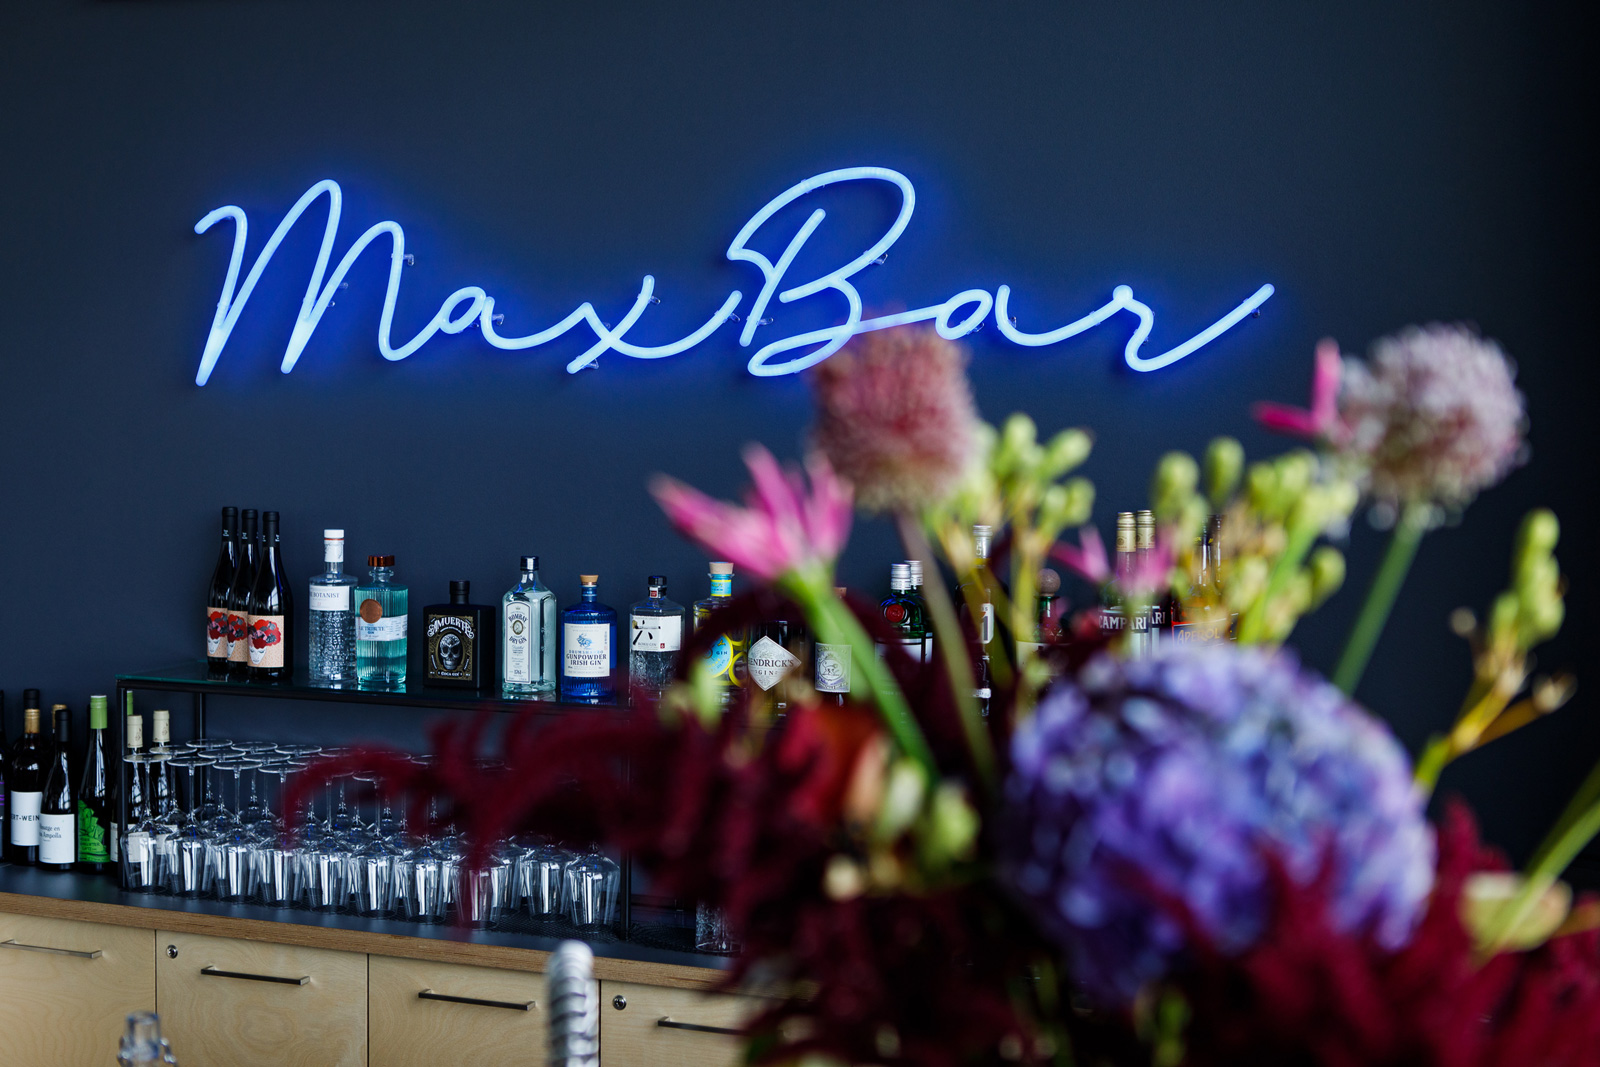 The new bar at Max Café, with blue wall, blue neon light as lettering and modern look.